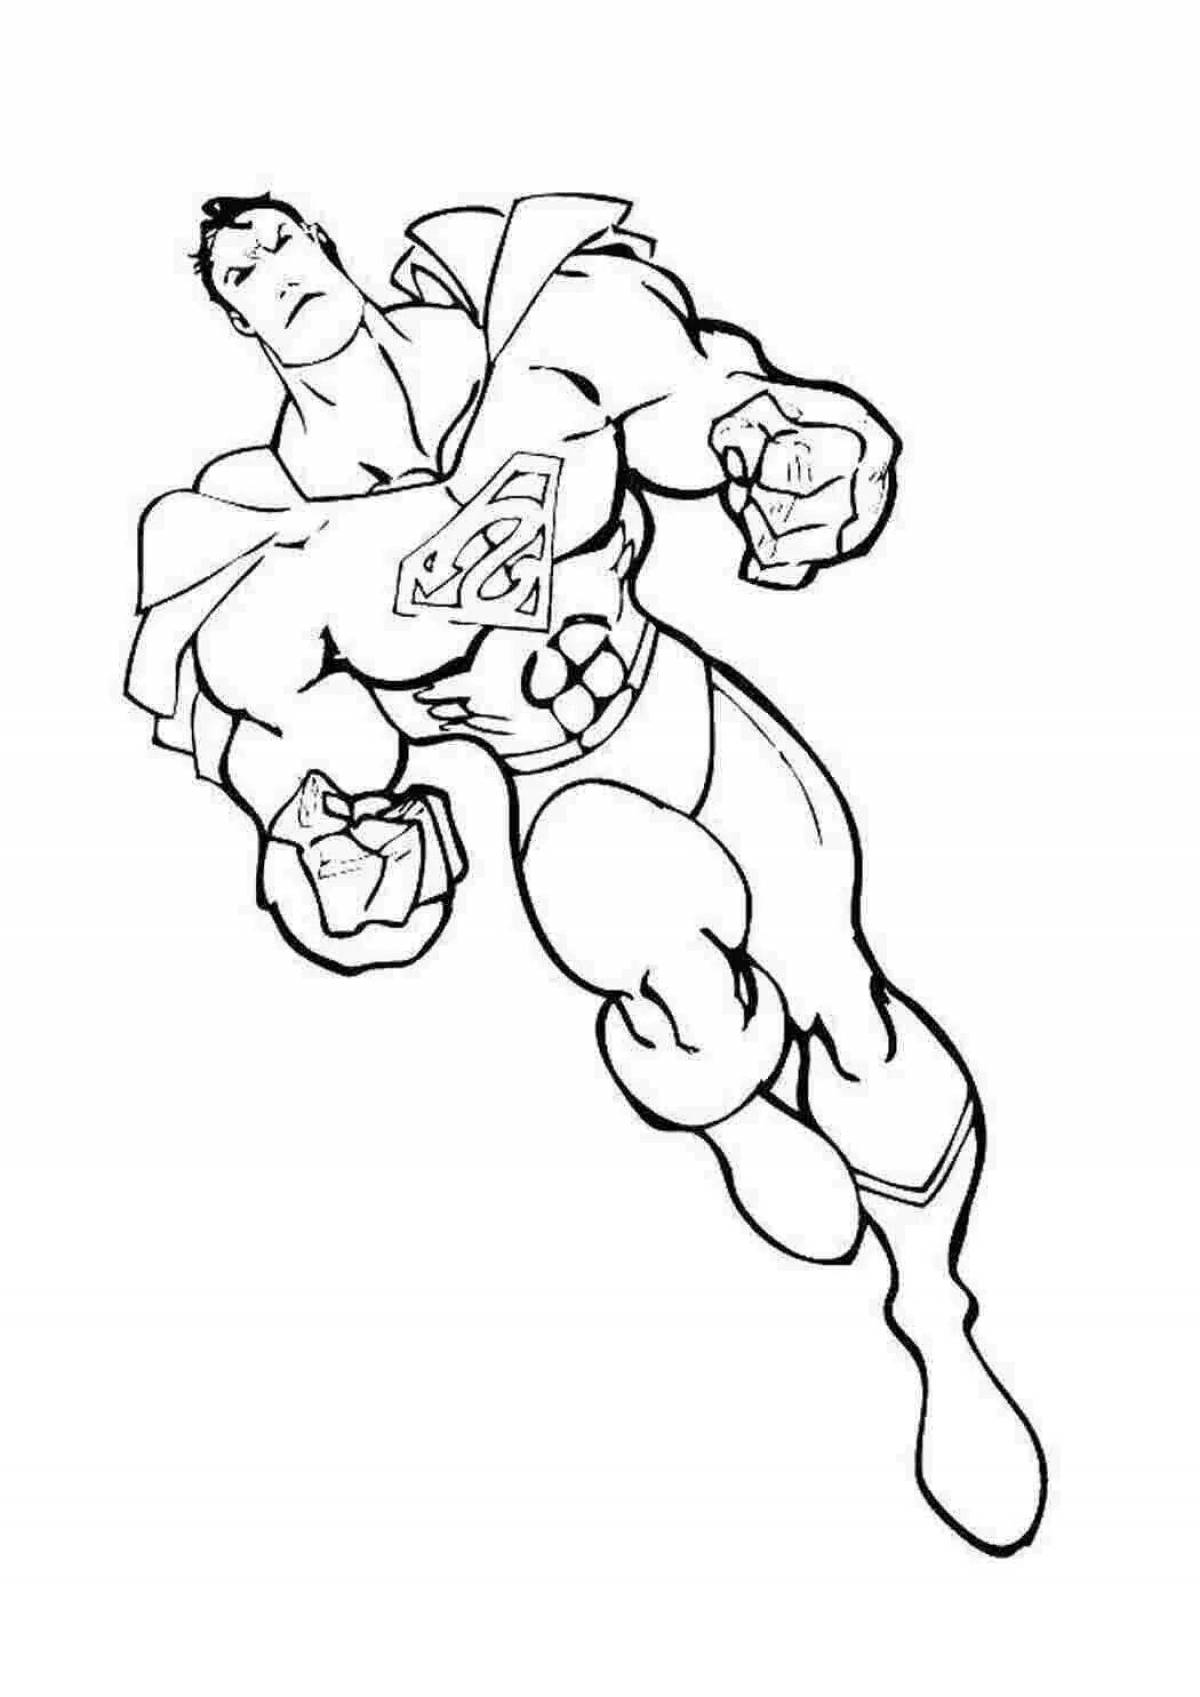 Great coloring book for hero boys